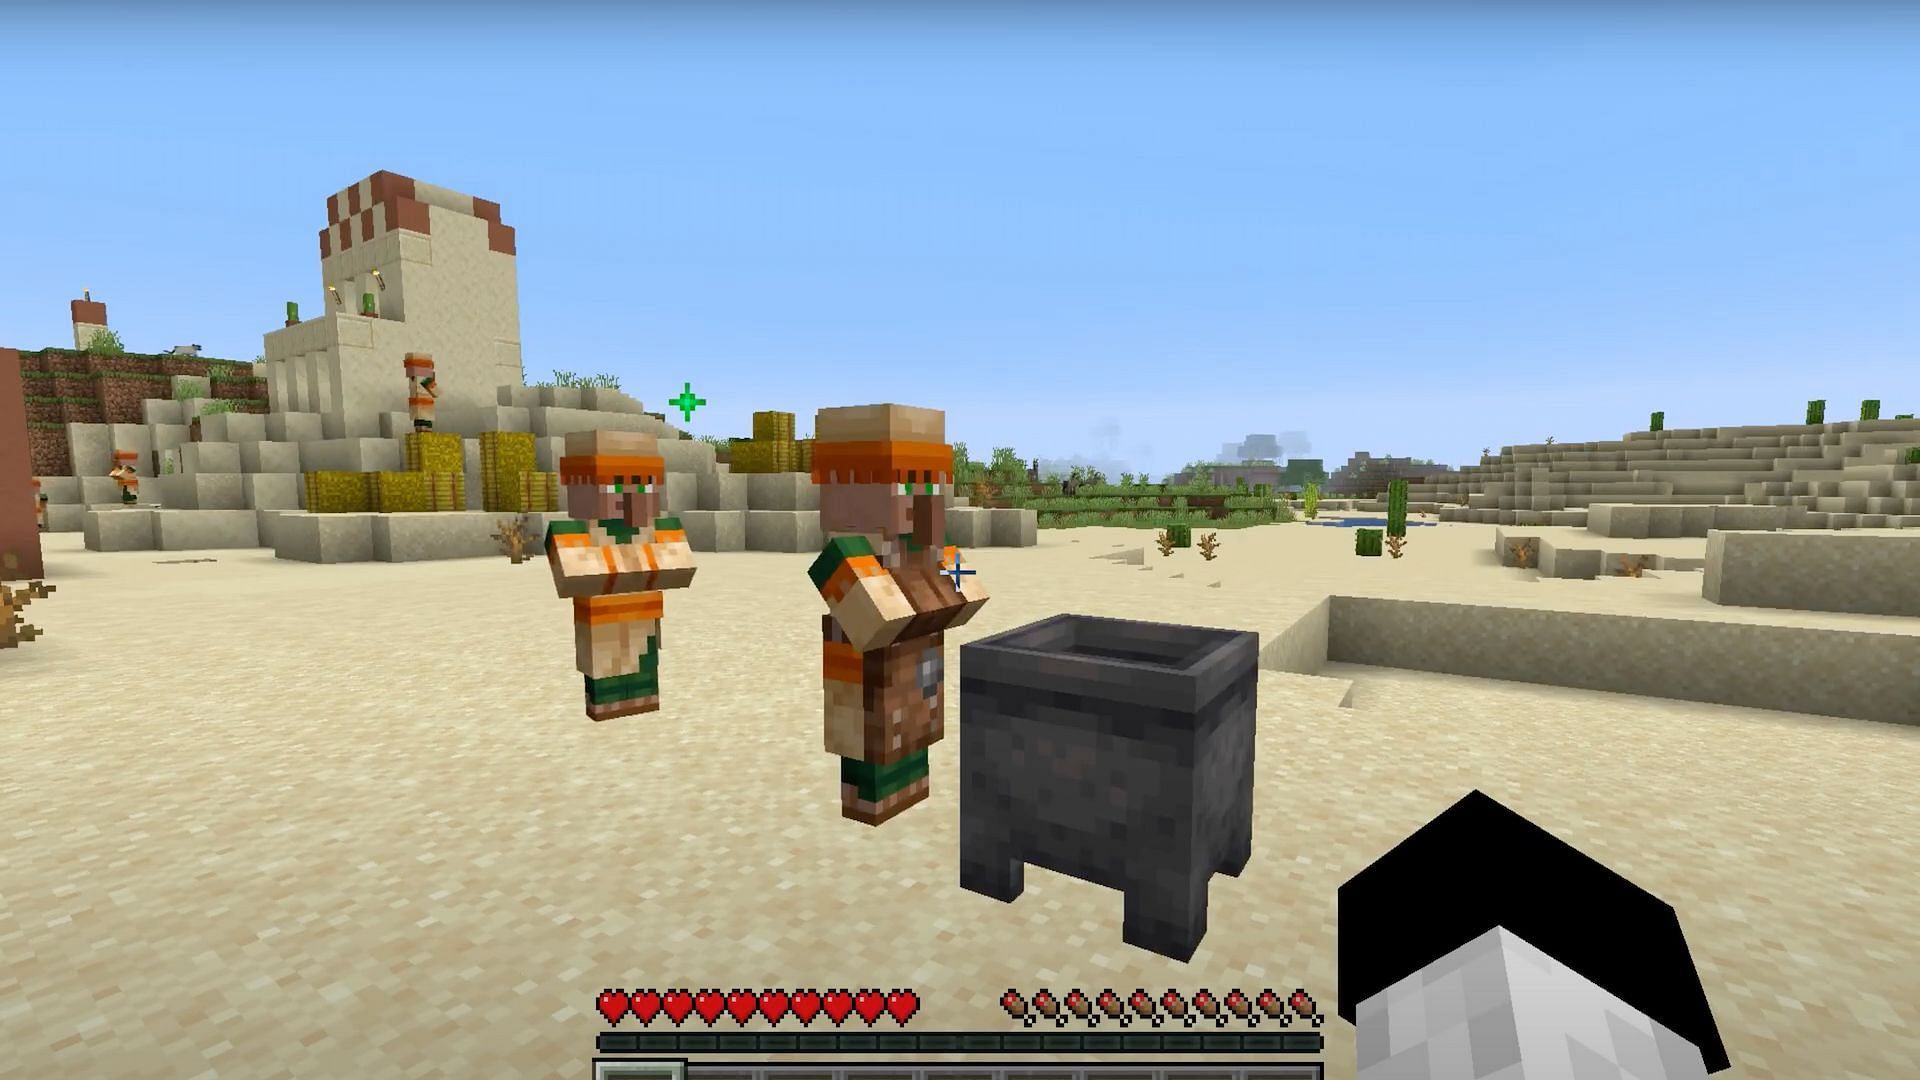 Players can create Leatherworker villagers by using a cauldron near an unemployed villager (Image via RajCraft/YouTube)